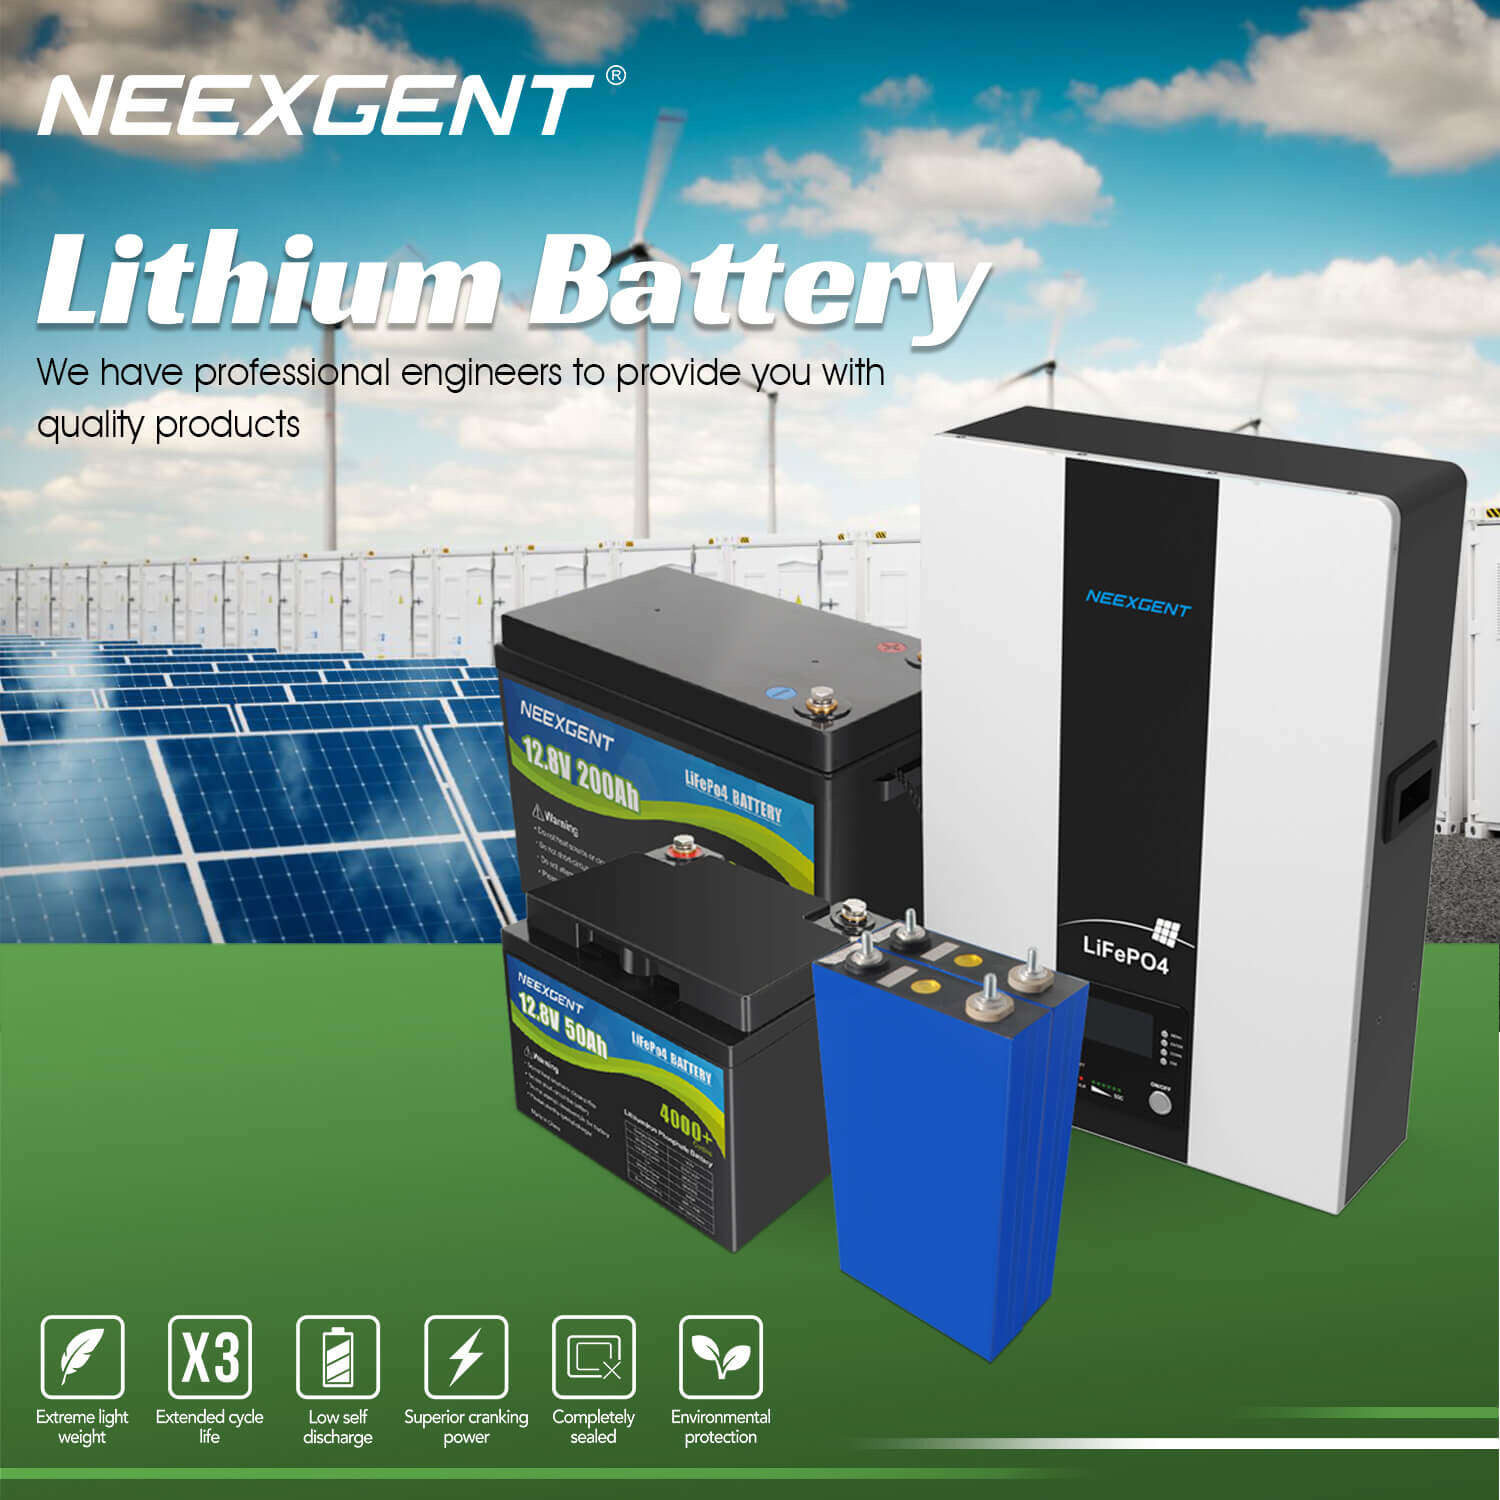 The working principle of lithium battery